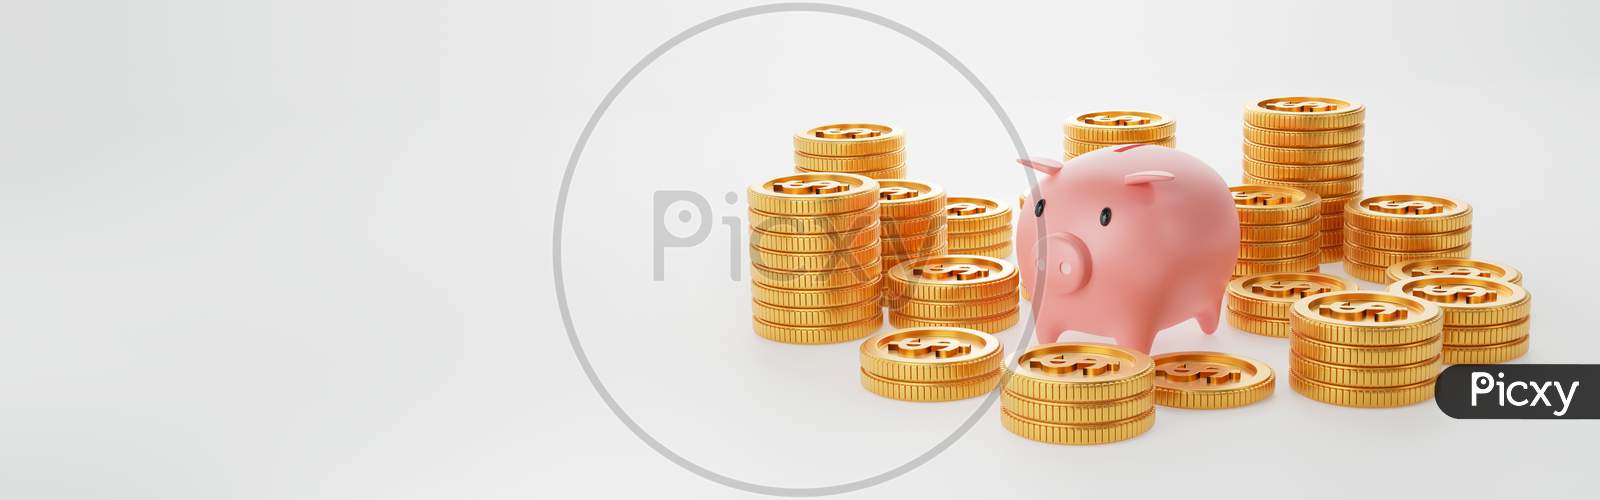 Piggy Bank With Gold Coin On Isolated White Background. Panorama Wide Angle Cover Banner With Copy Space On Left Side. Money Saving And Business Economic Investment Concept. 3D Illustration Rendering